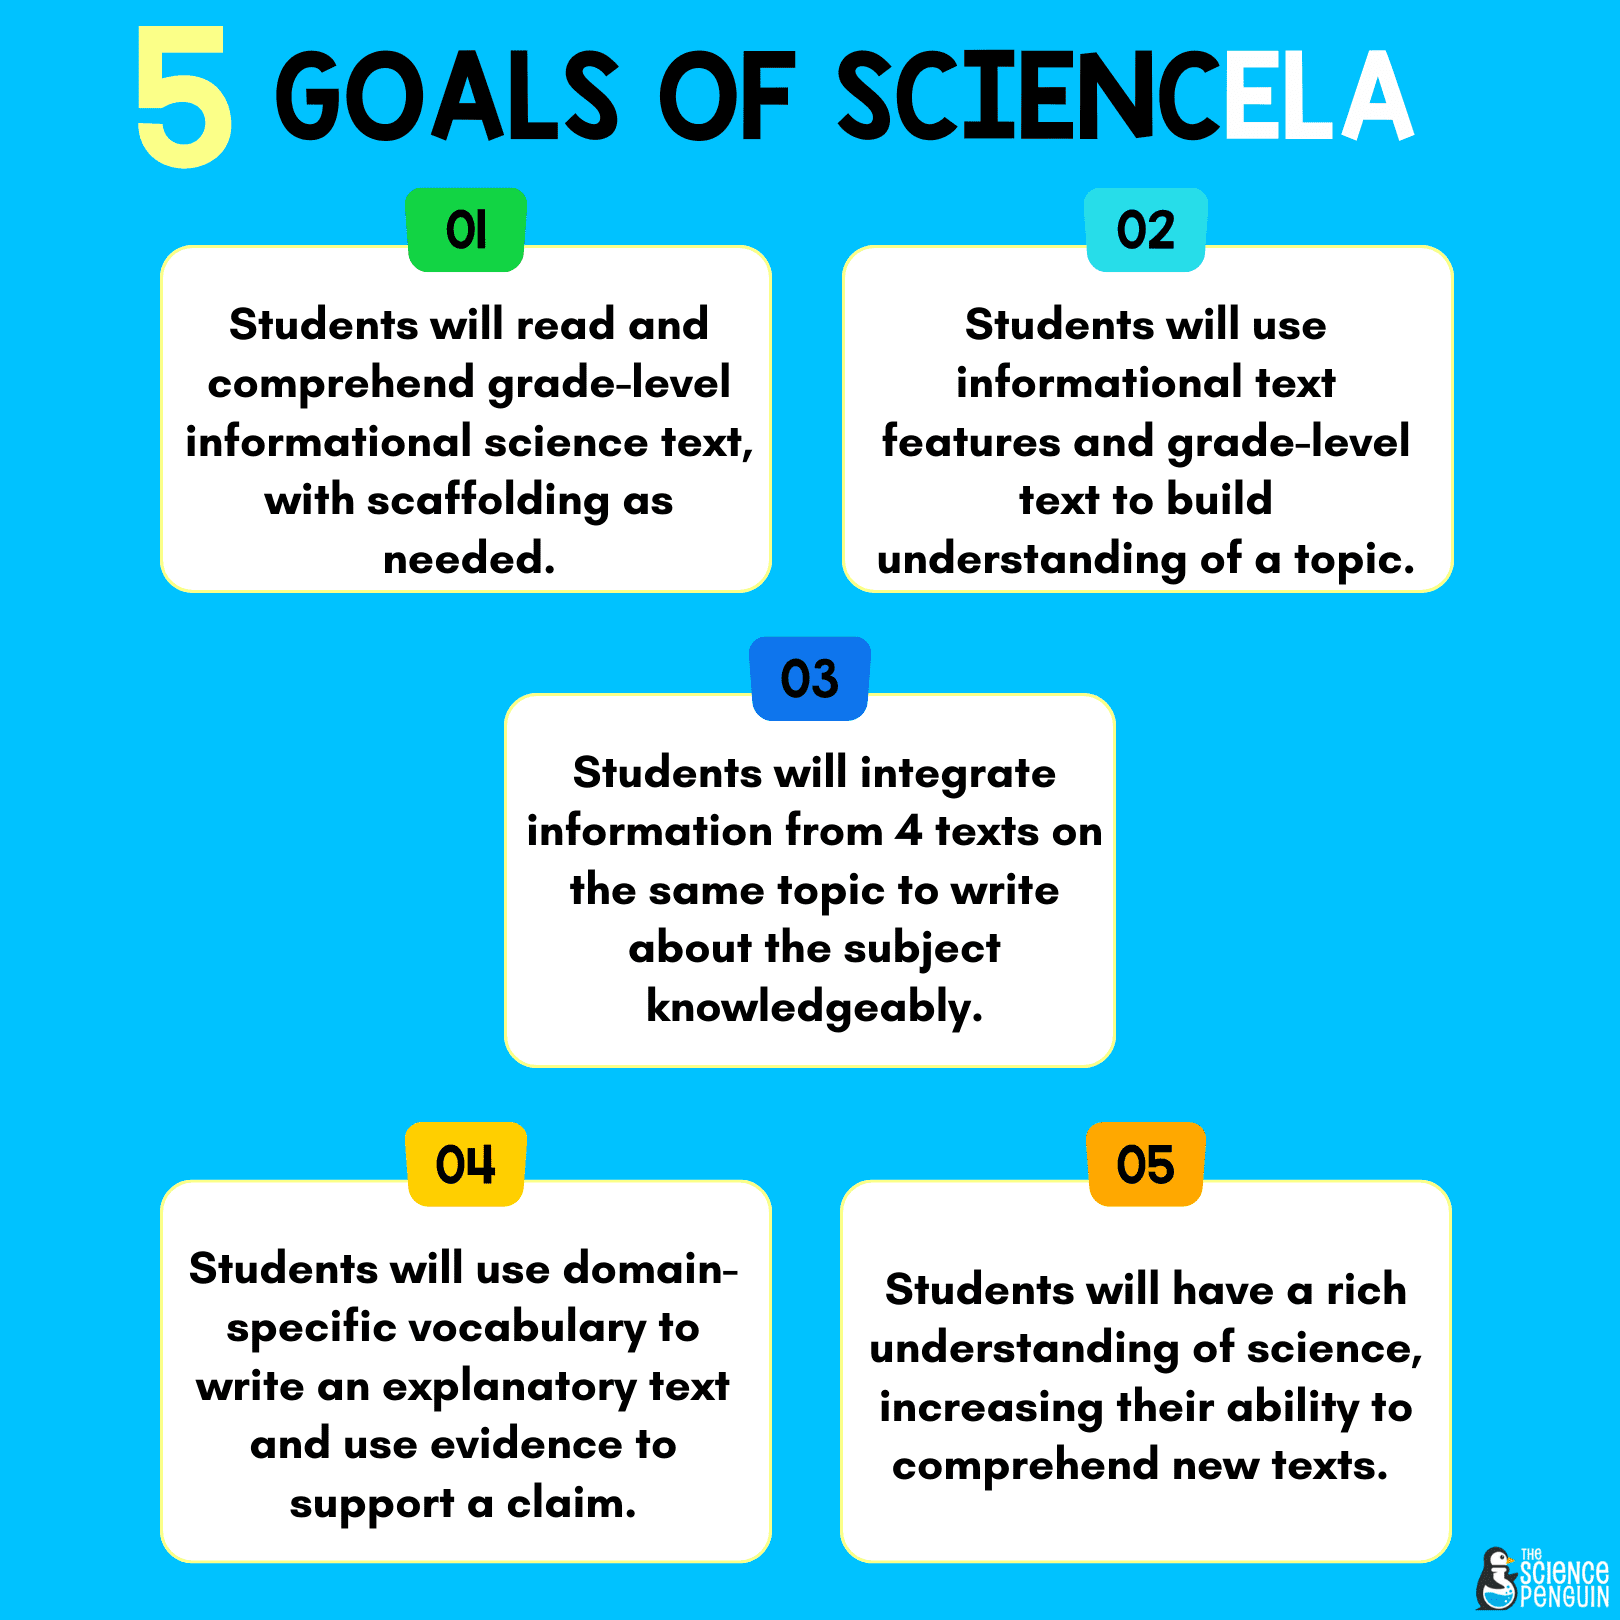 5 Goals of SciencELA and the Science of Reading